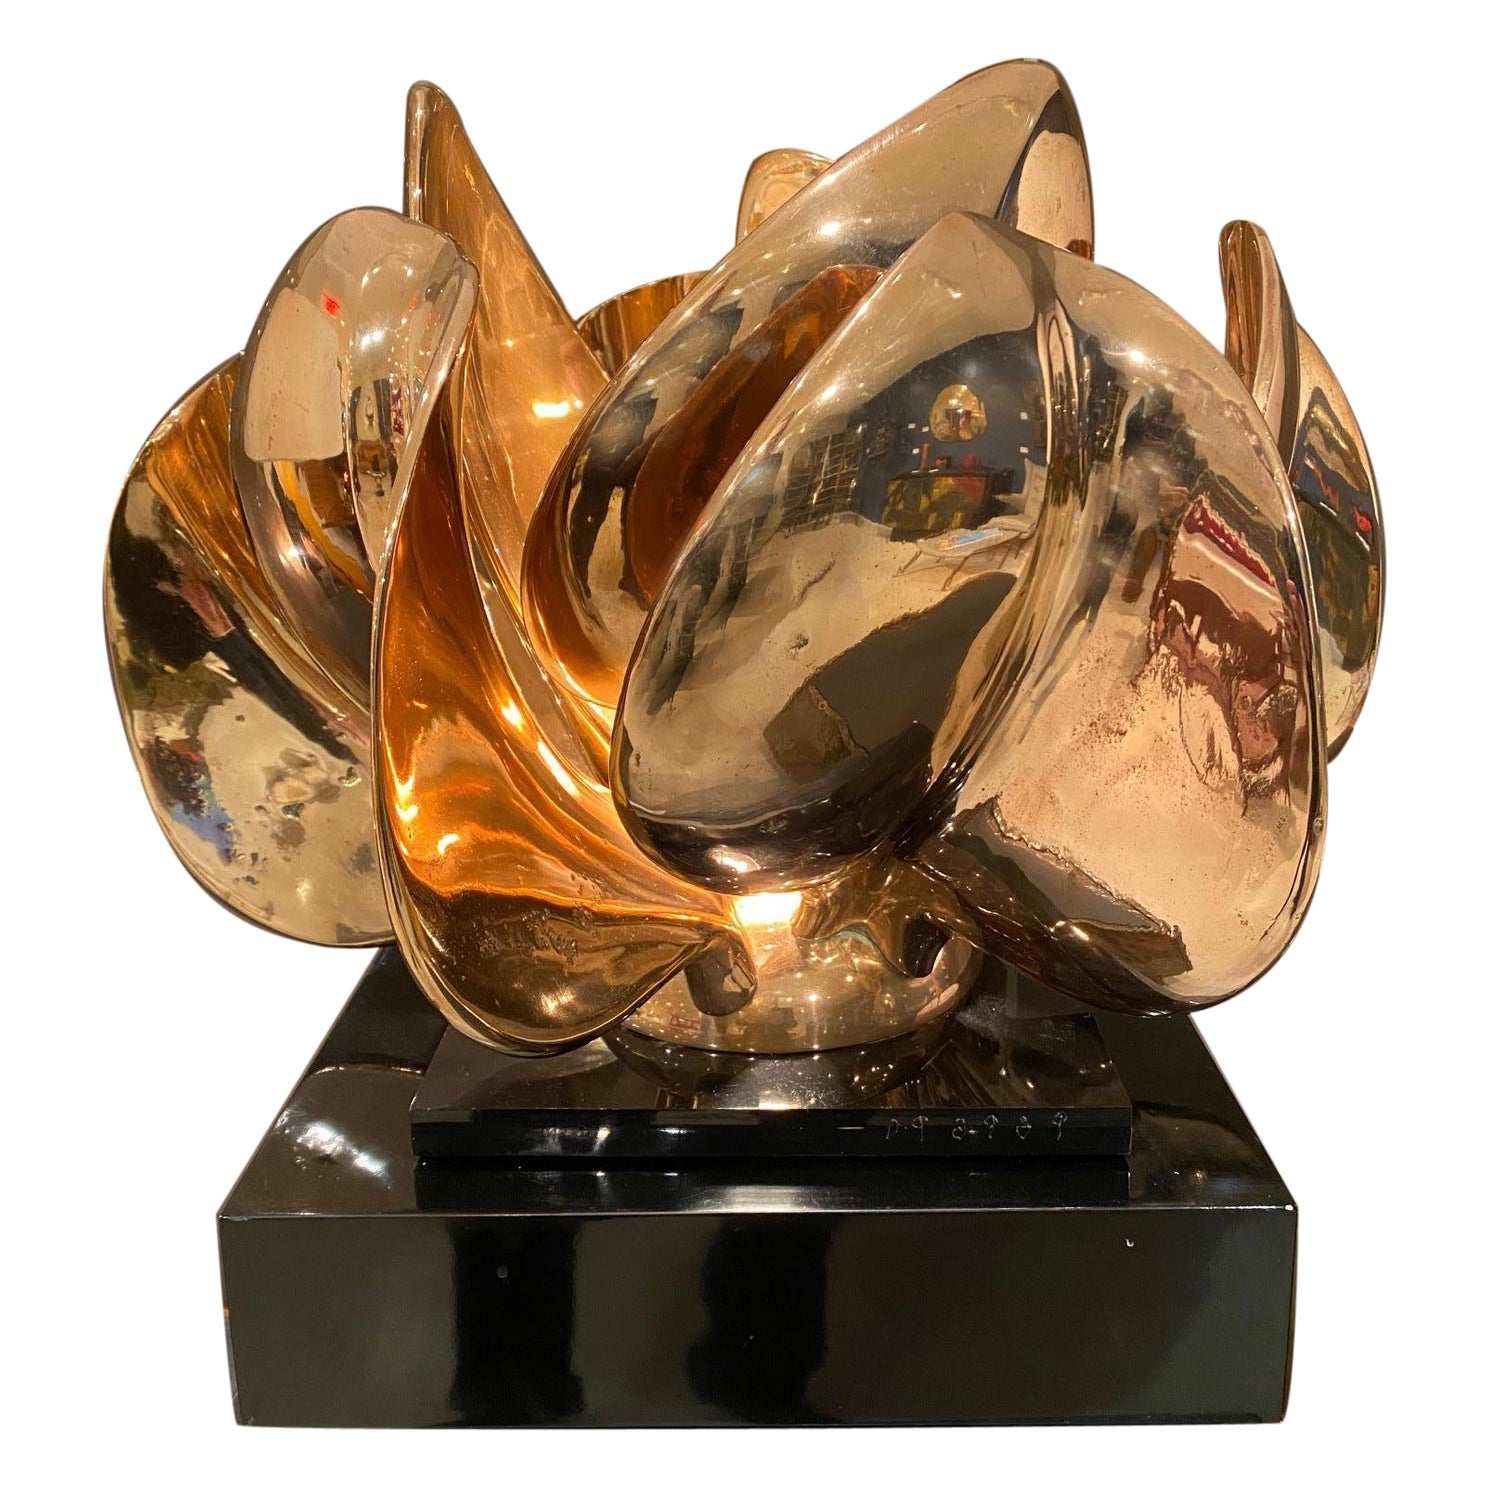 Solid Bronze Illuminated Sculpture "Fleur D'or" by Atelier Michel Armand